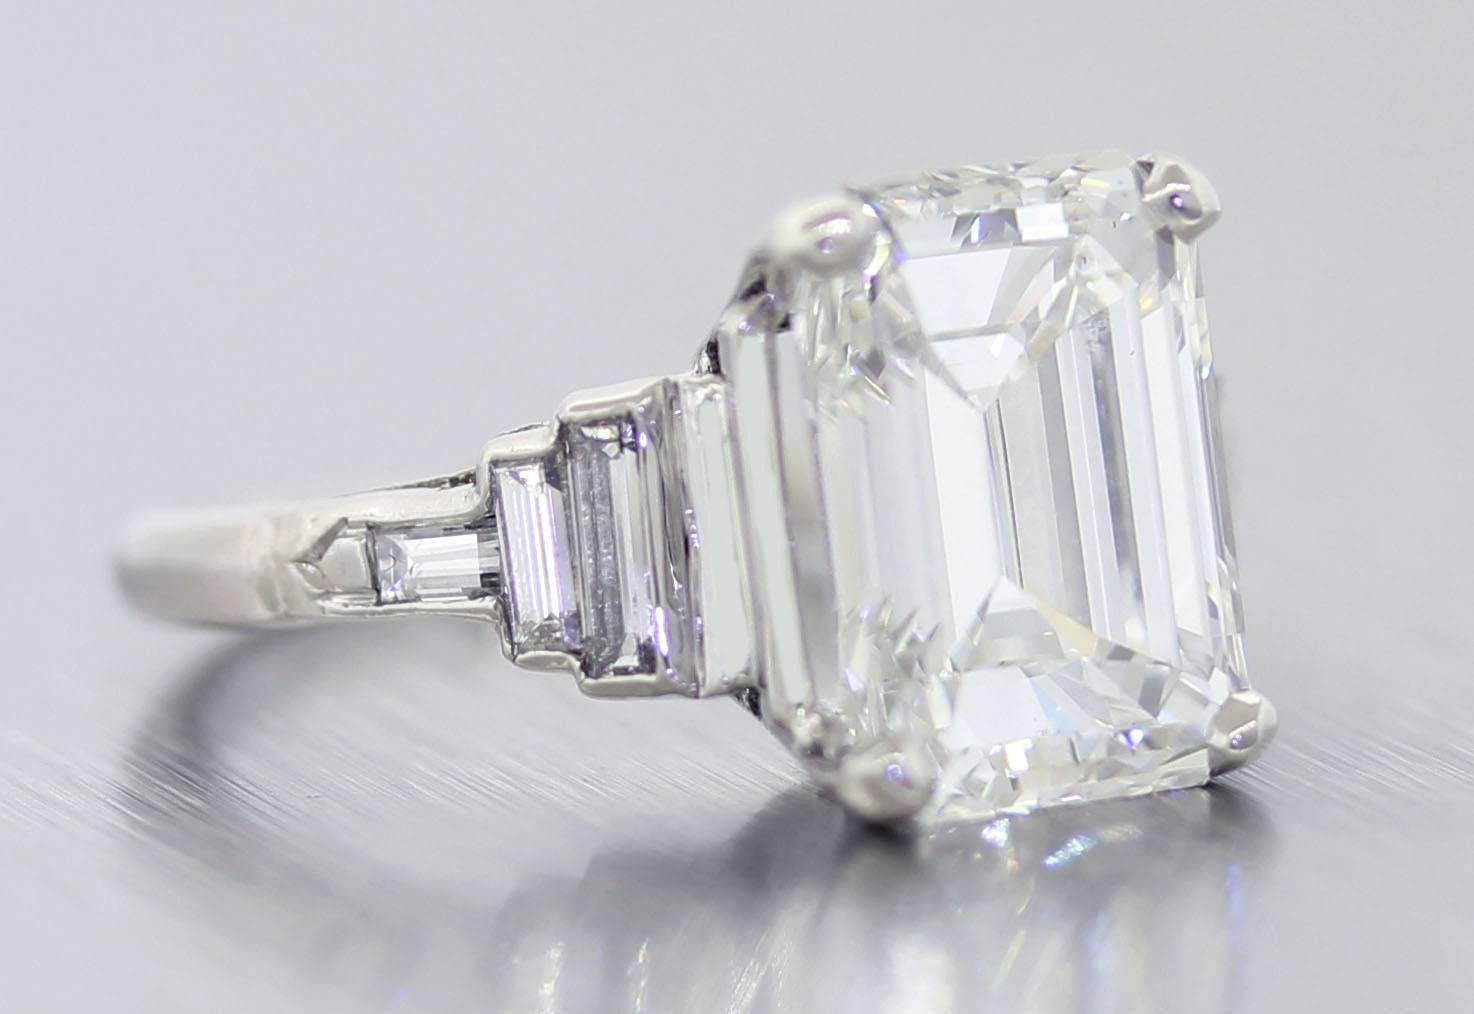 This is an exquisite platinum and 4.6 carat center diamond engagement ring. This ring's center diamond was graded by GIA; one of the most reputable diamond grading organizations in the world. The ring is a size 7.0, and is also re-sizable. Contact